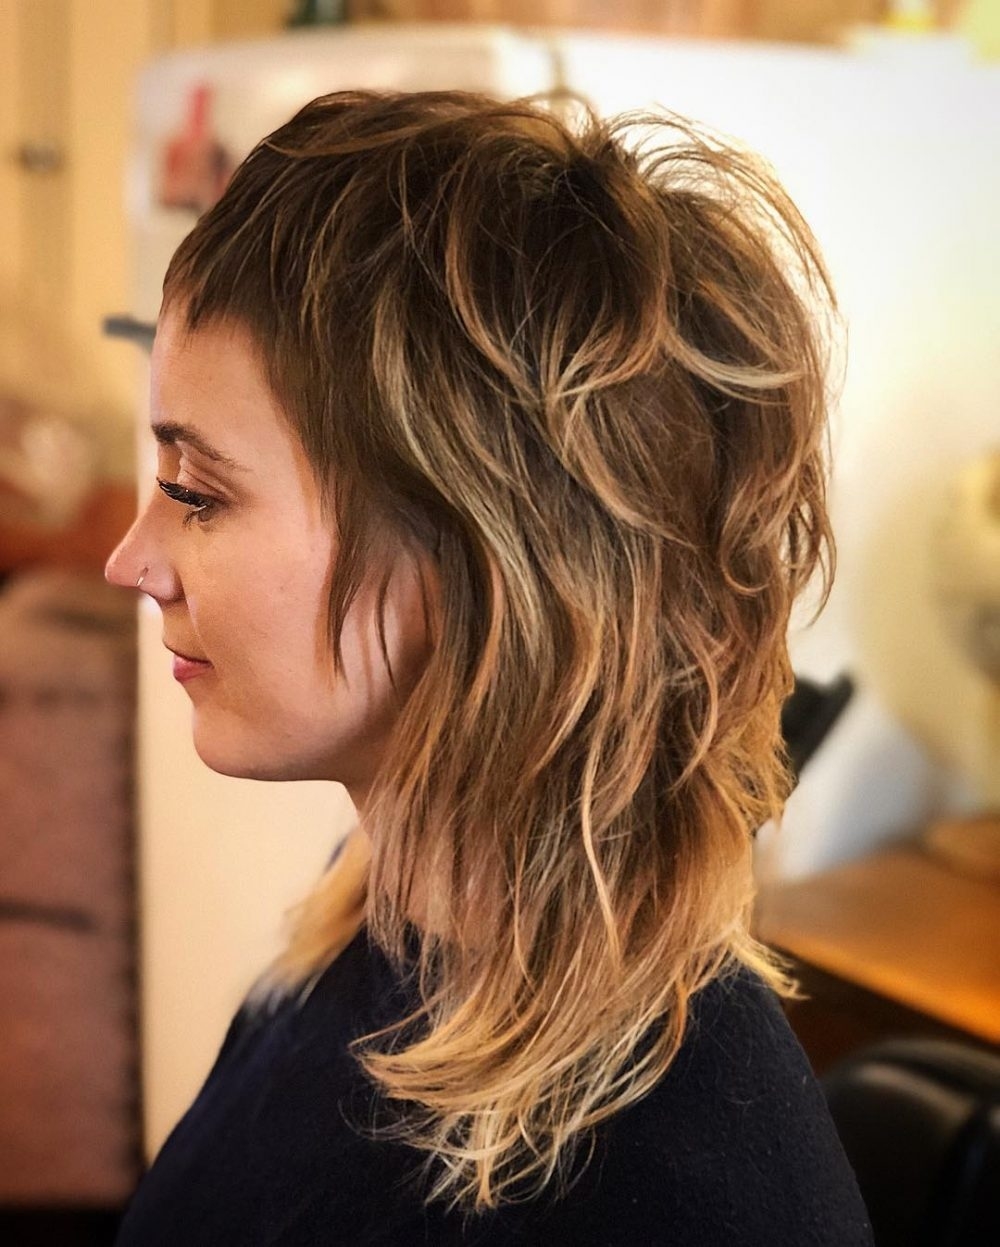 34 Short Bangs That Are Totally Hot In 2019 within Long Bang Shorter On One Side